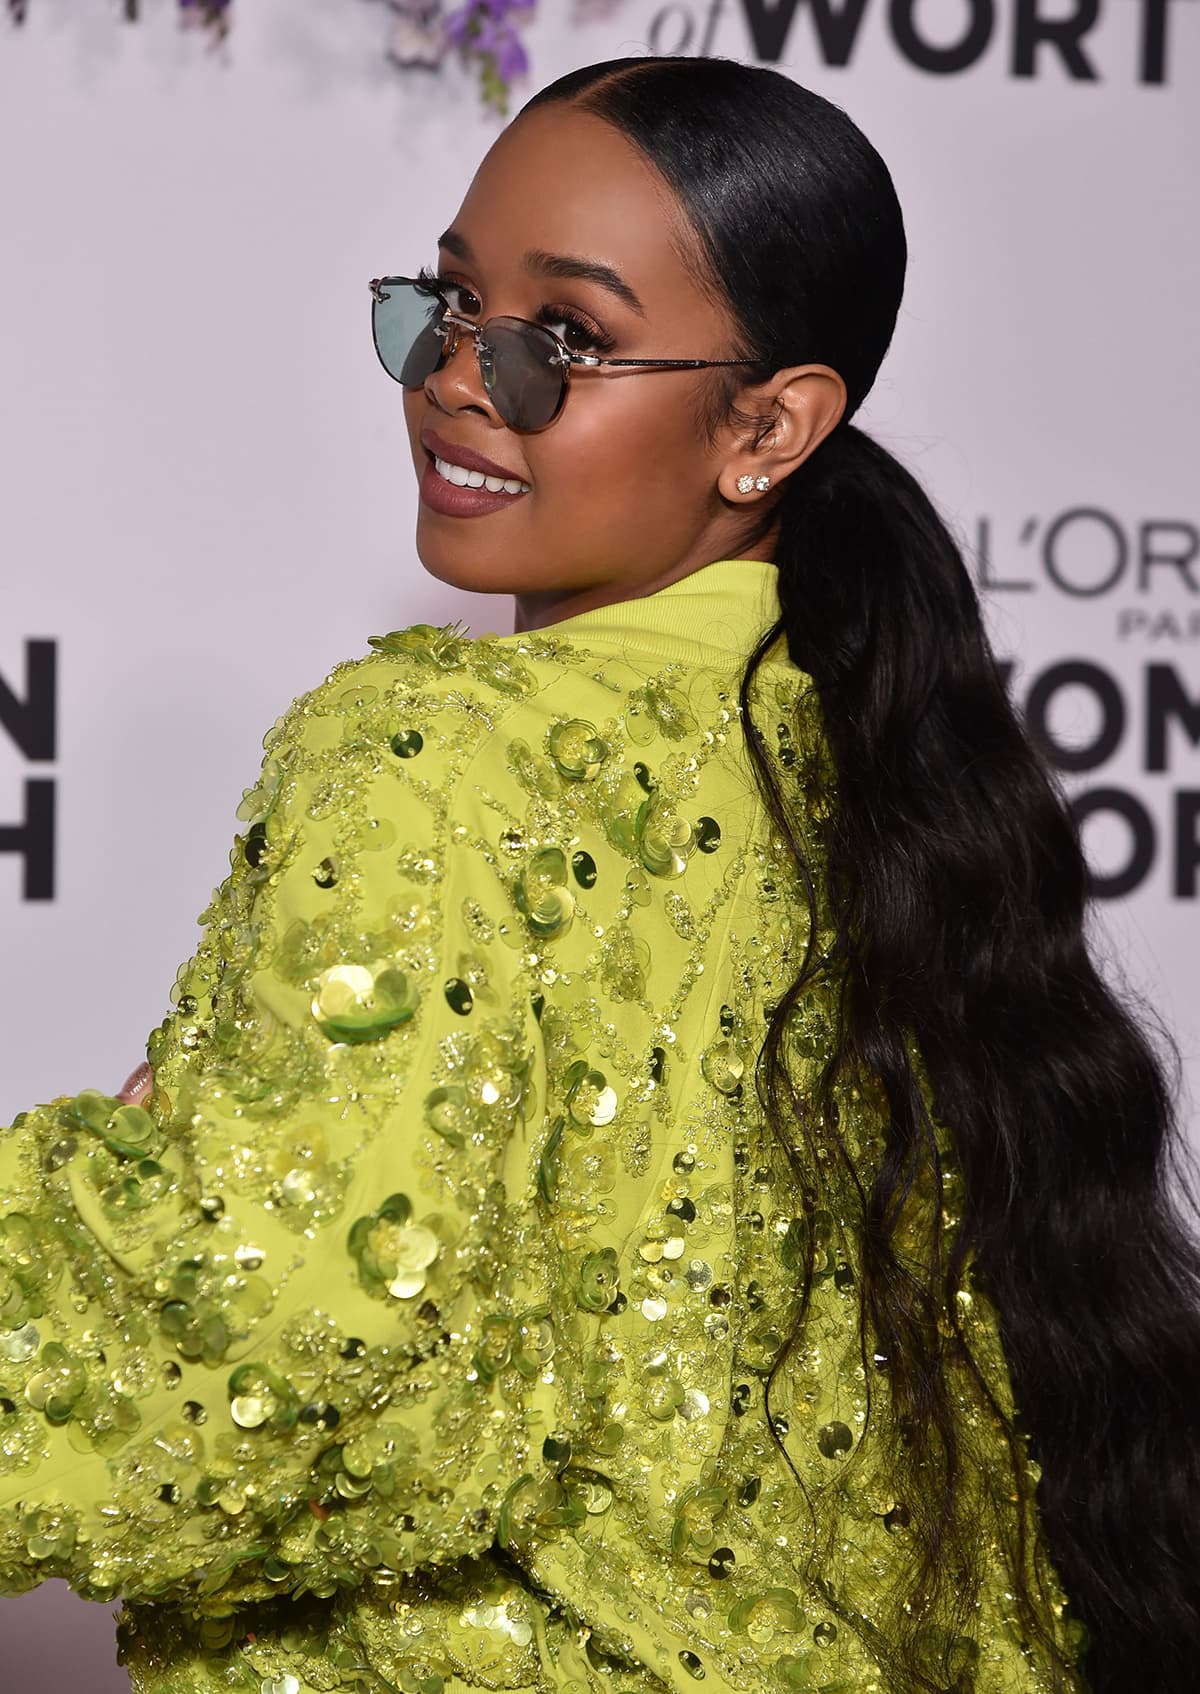 H.E.R. keeps the rest of her look simple with round sunglasses, diamond studs, and a ponytail